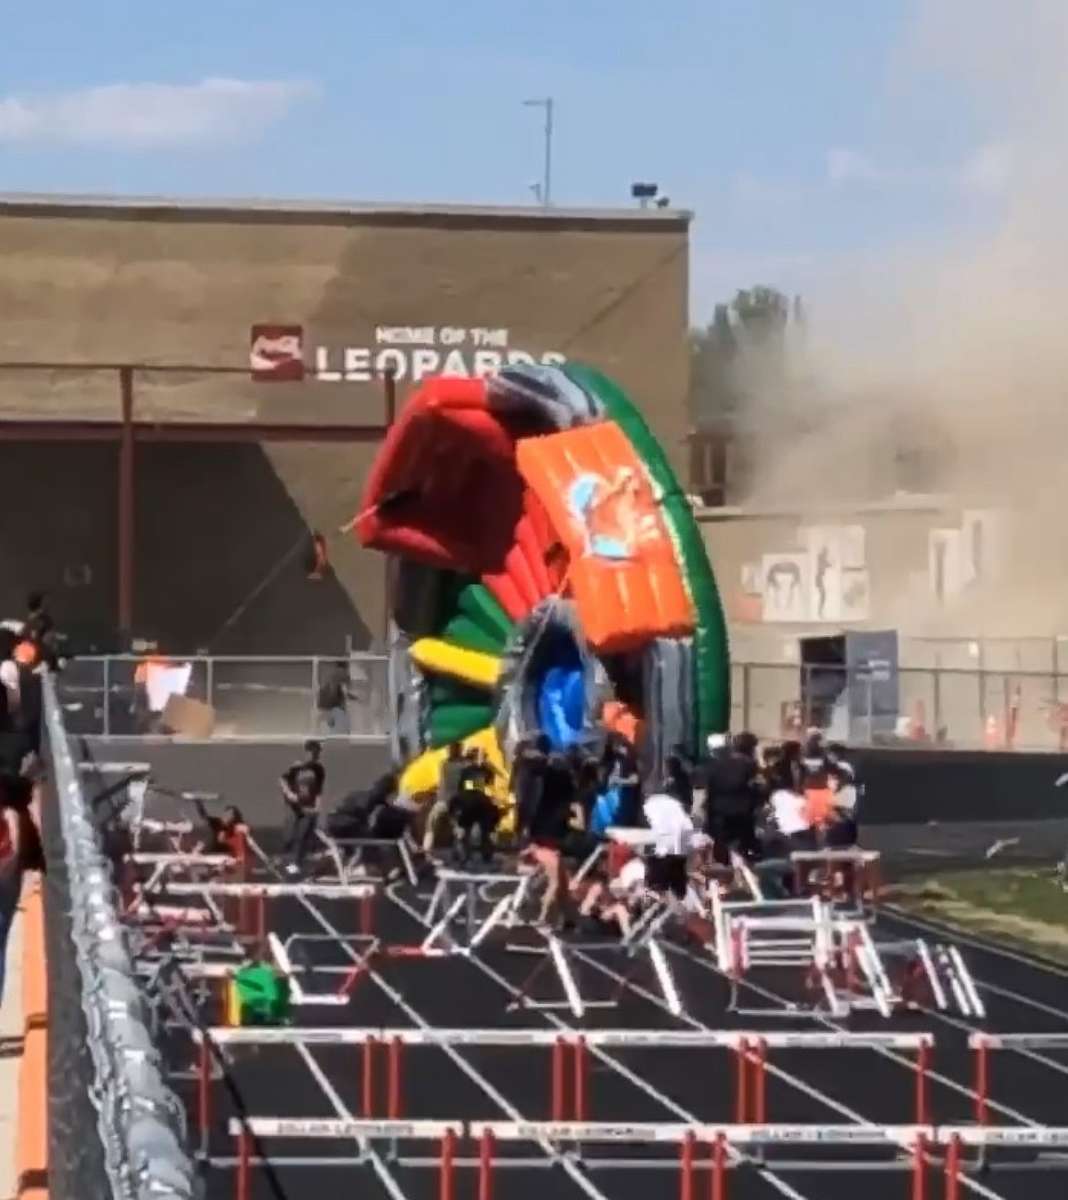 PHOTO: Five people were injured, including one critically, when an inflatable game blew over at Zillah High School in Zillah, Wash., on Wednesday, May 1, 2019.